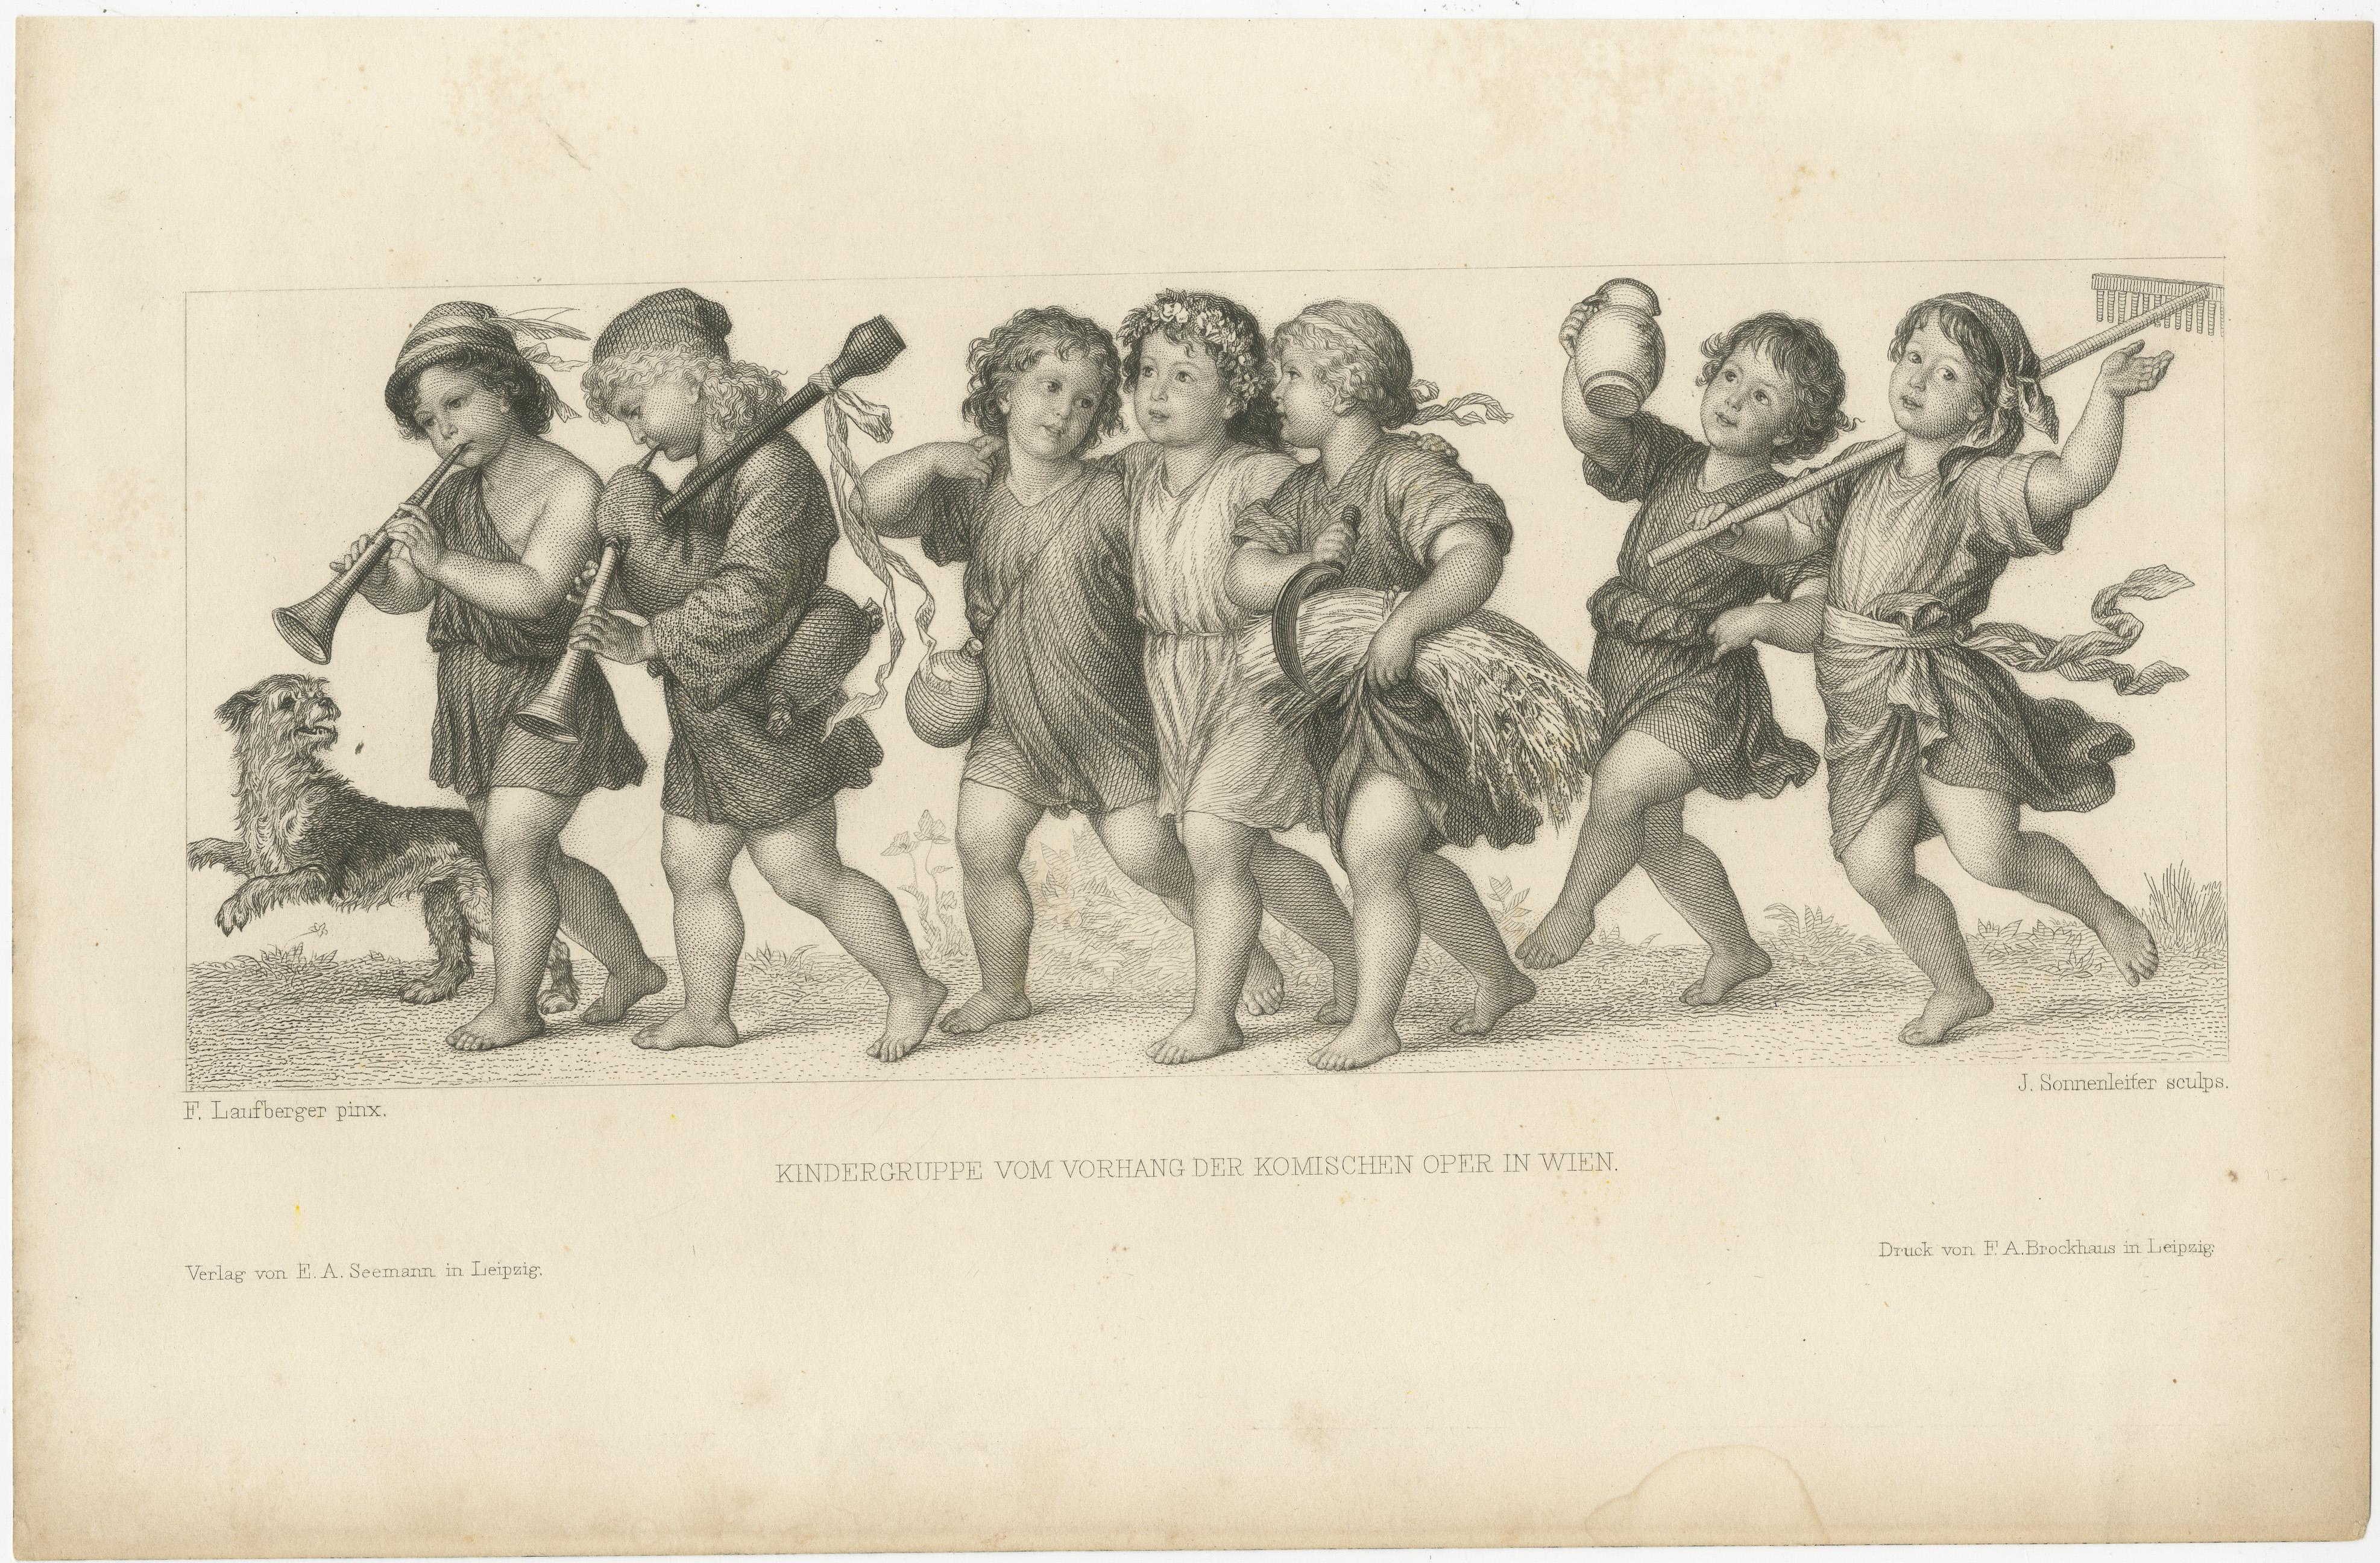 Antique print titled 'Kindergruppe vom Vorhang der Komischen Oper in Wien'. This print shows part of the curtain for the comic opera in the new opera house in Vienna, it shows a group of children. 

Engraved by J. Sonnenleifer after a paiting by